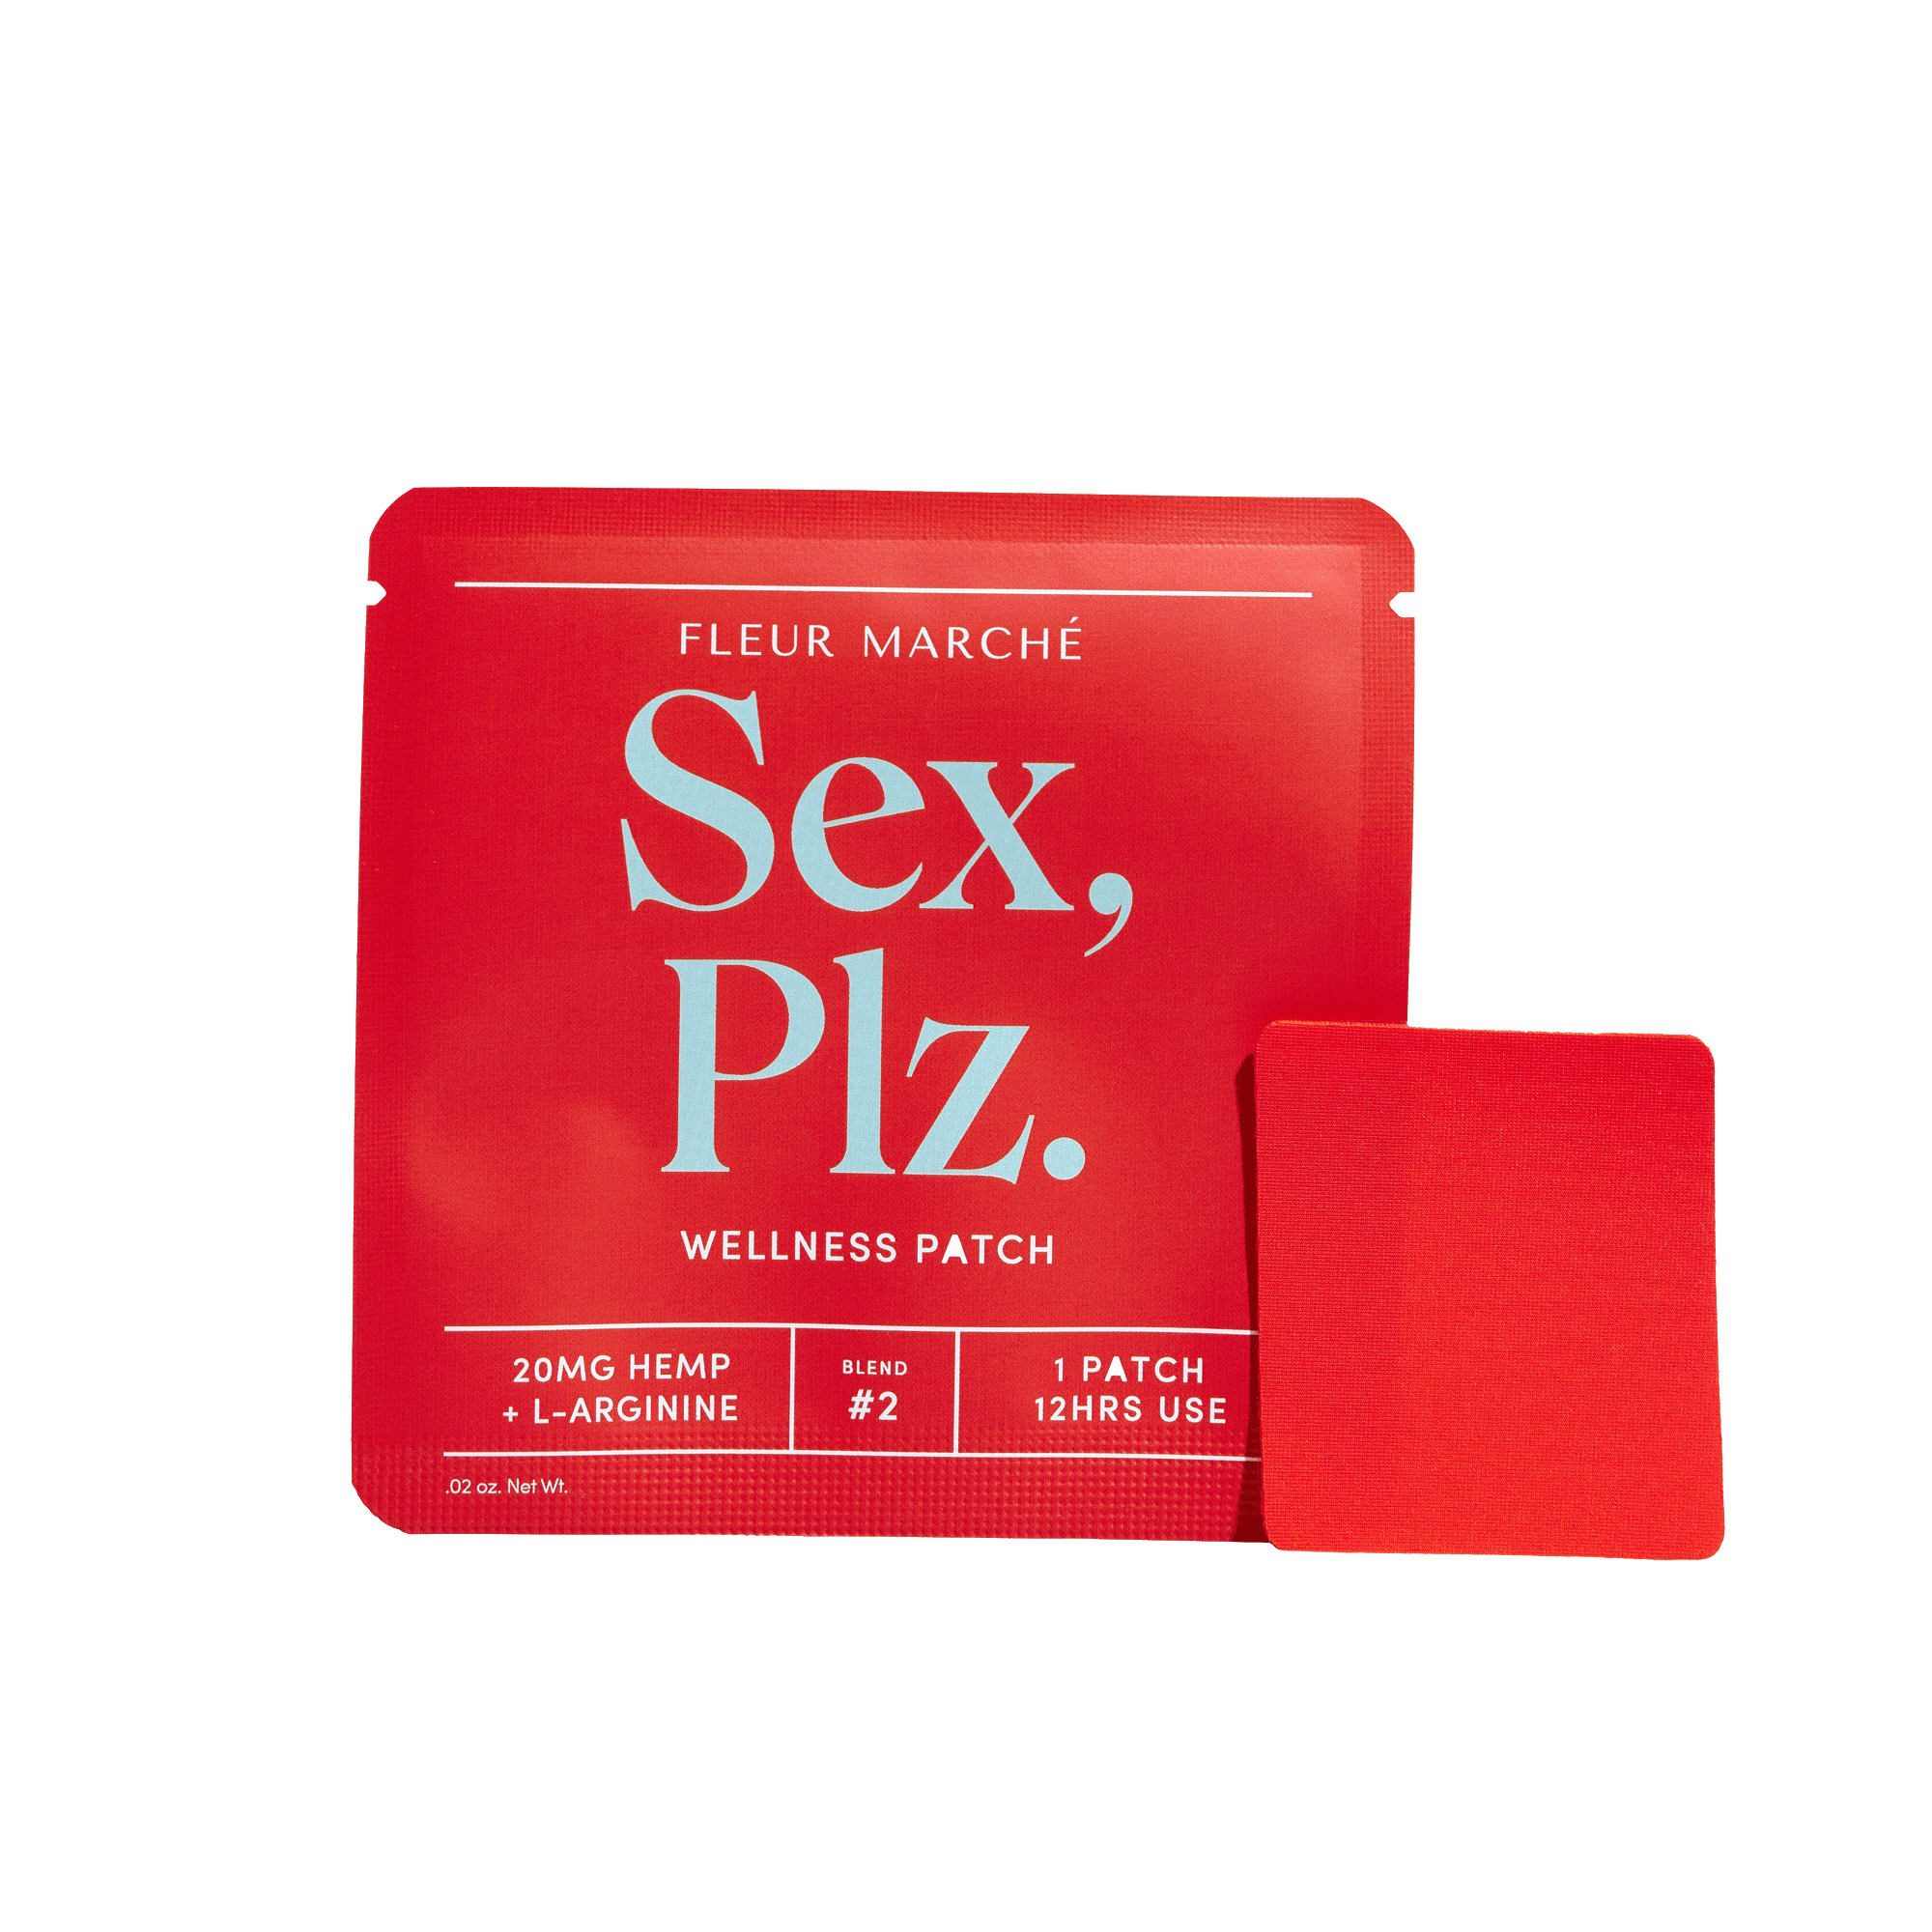 Sex Plz. patch and container